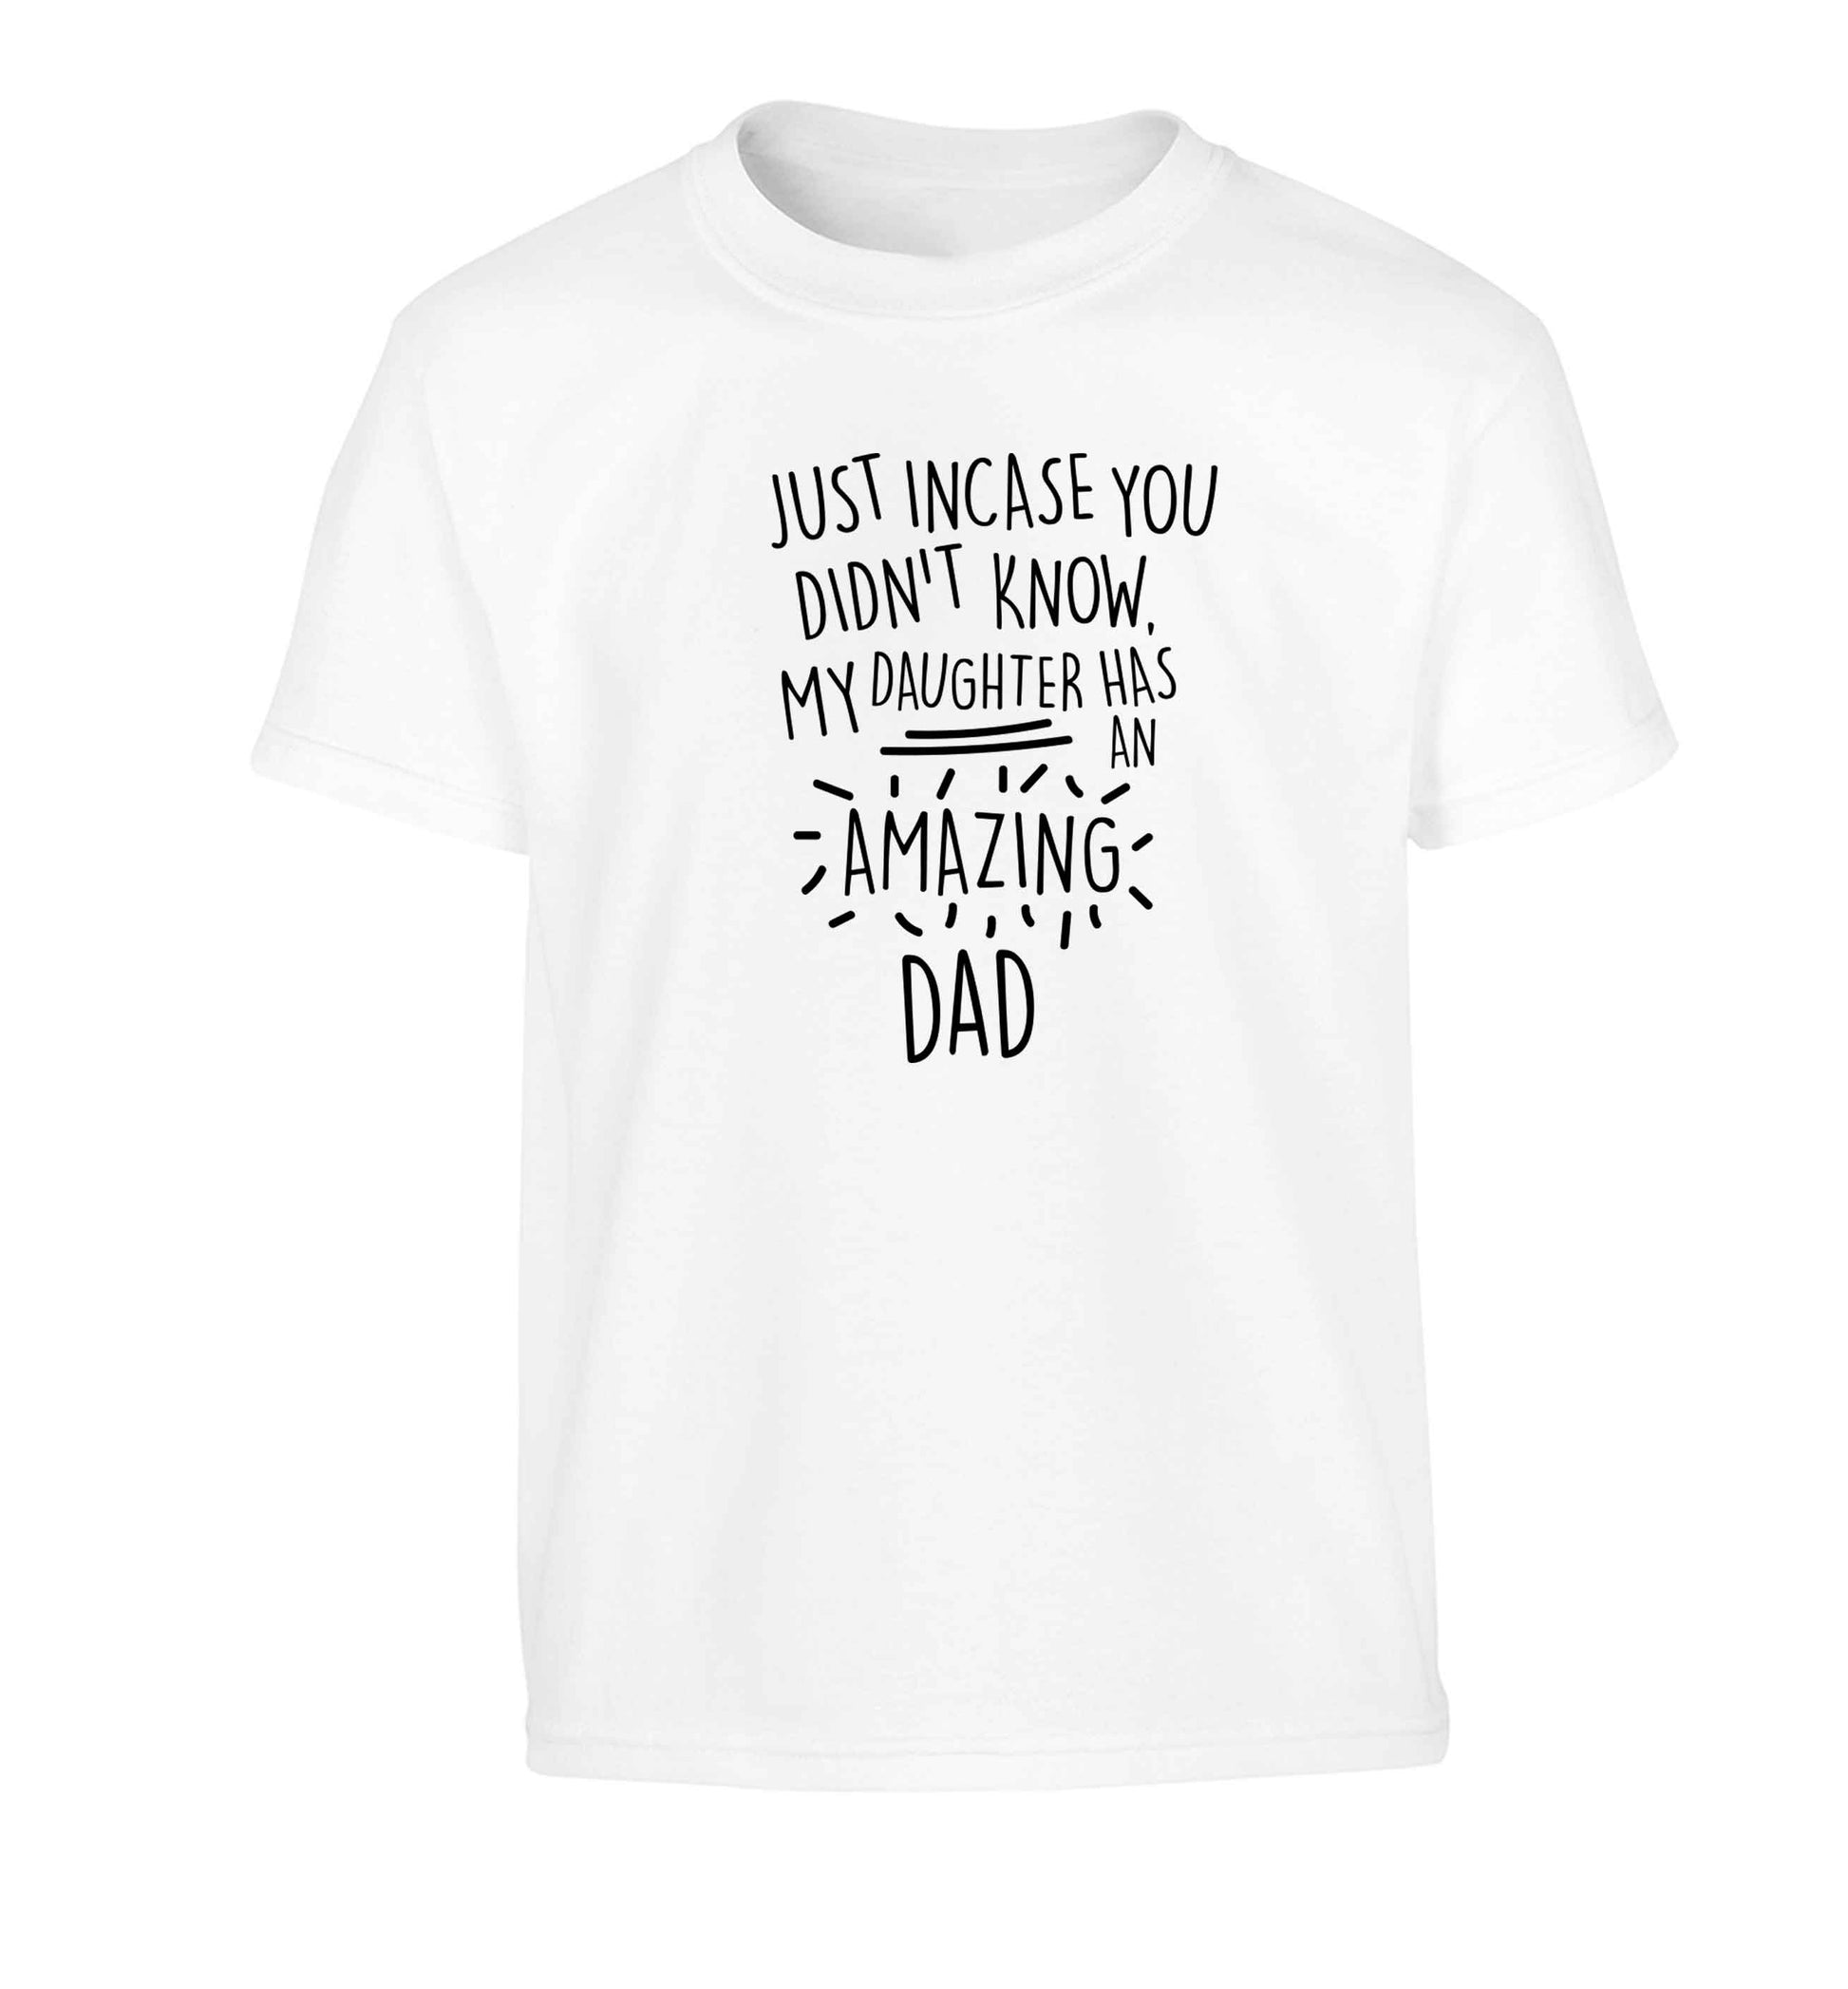 Just incase you didn't know my daughter has an amazing dad Children's white Tshirt 12-13 Years